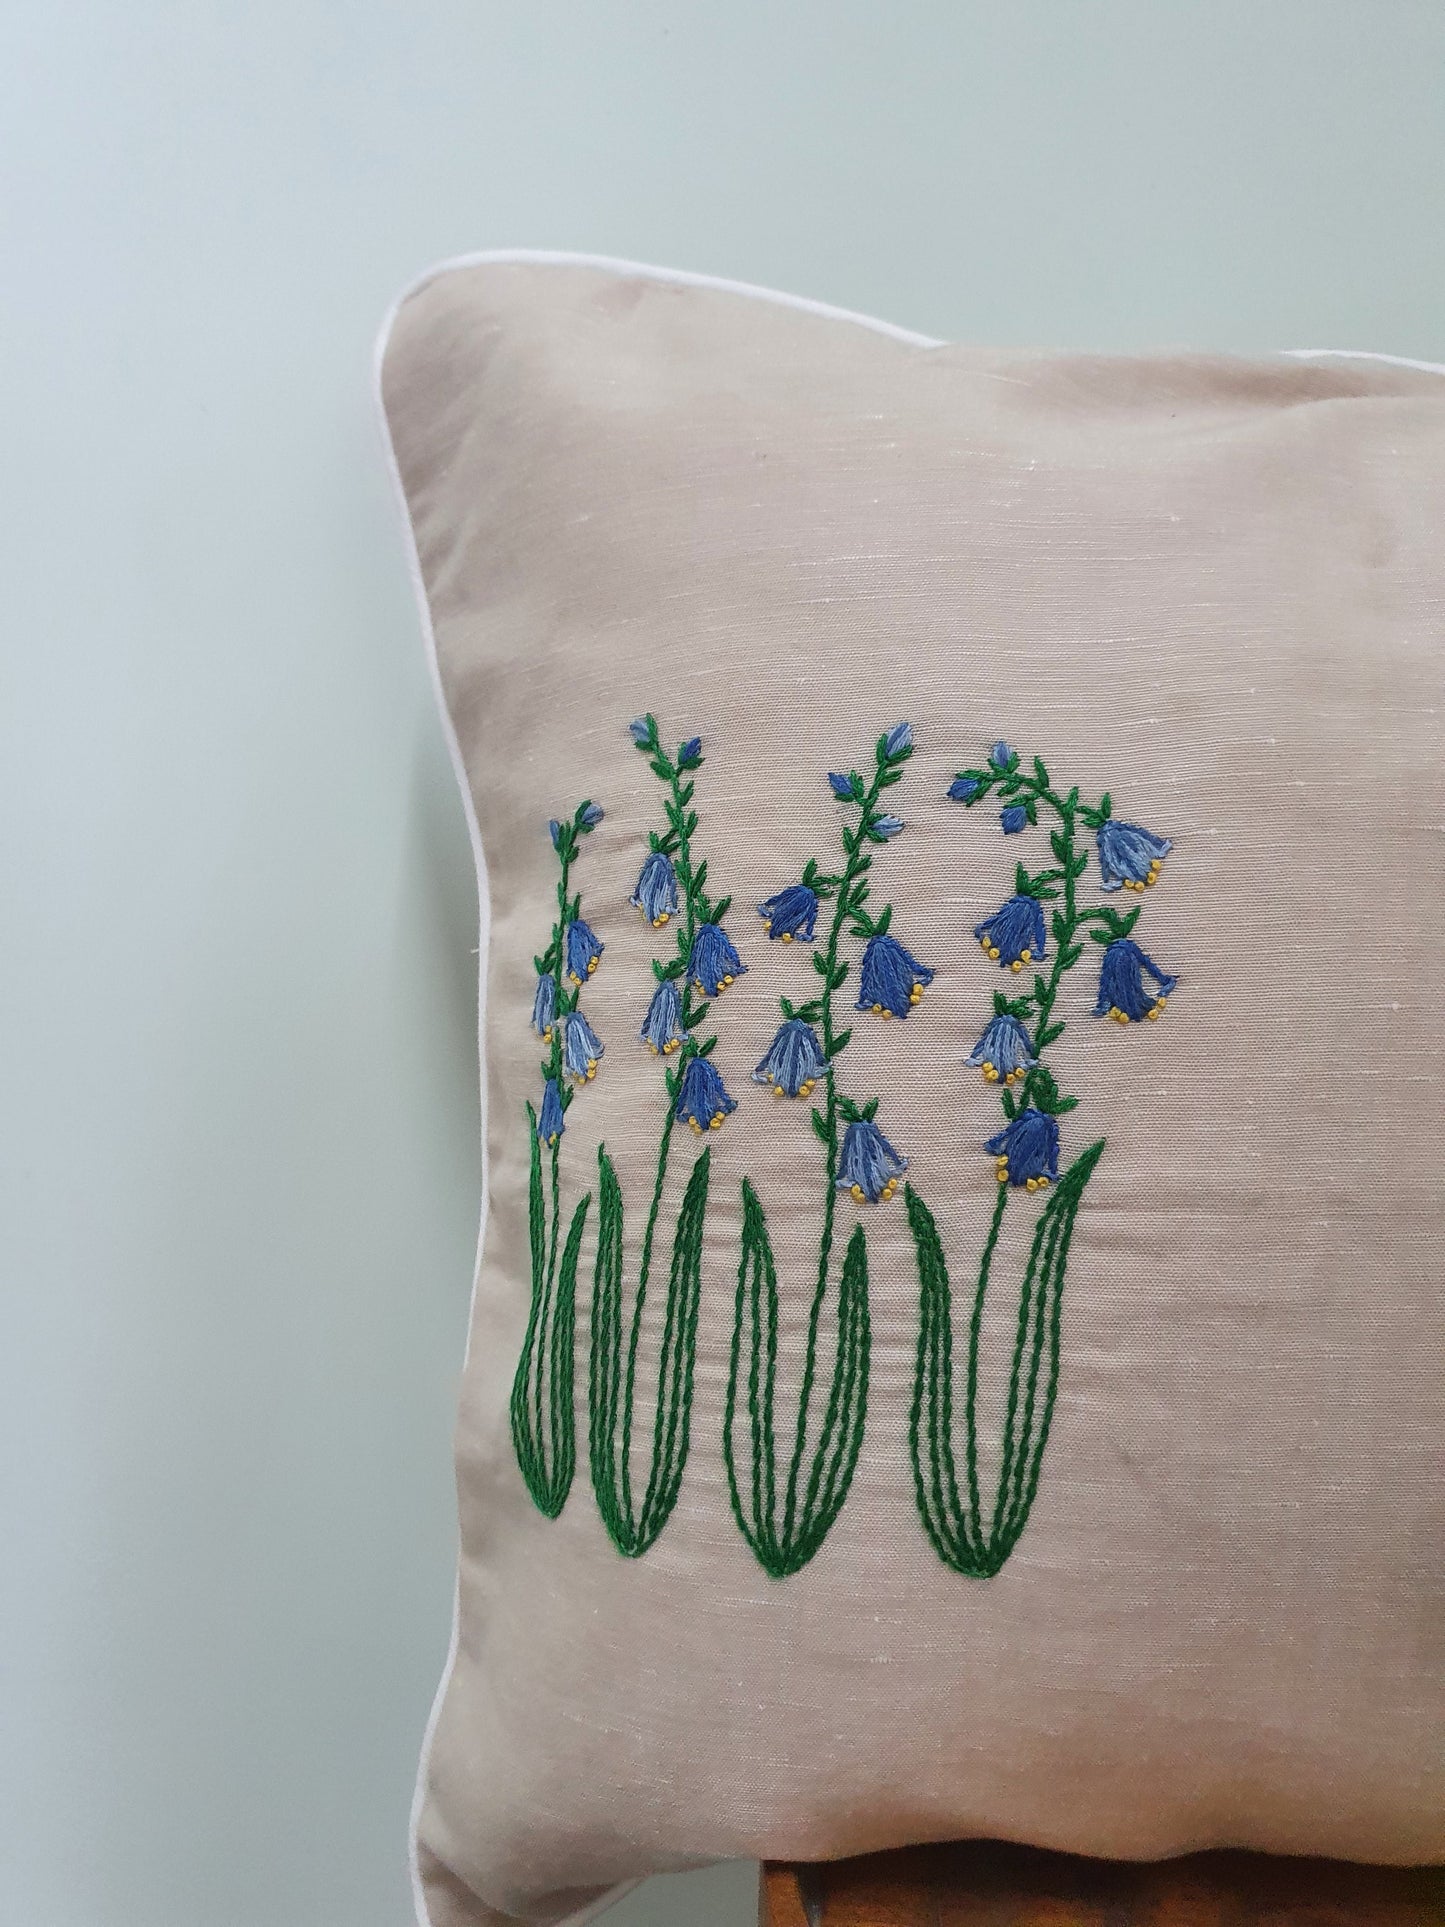 Ikali – Lavender Wreath - Hand-embroidered Cushion Cover Set (Set of 2)